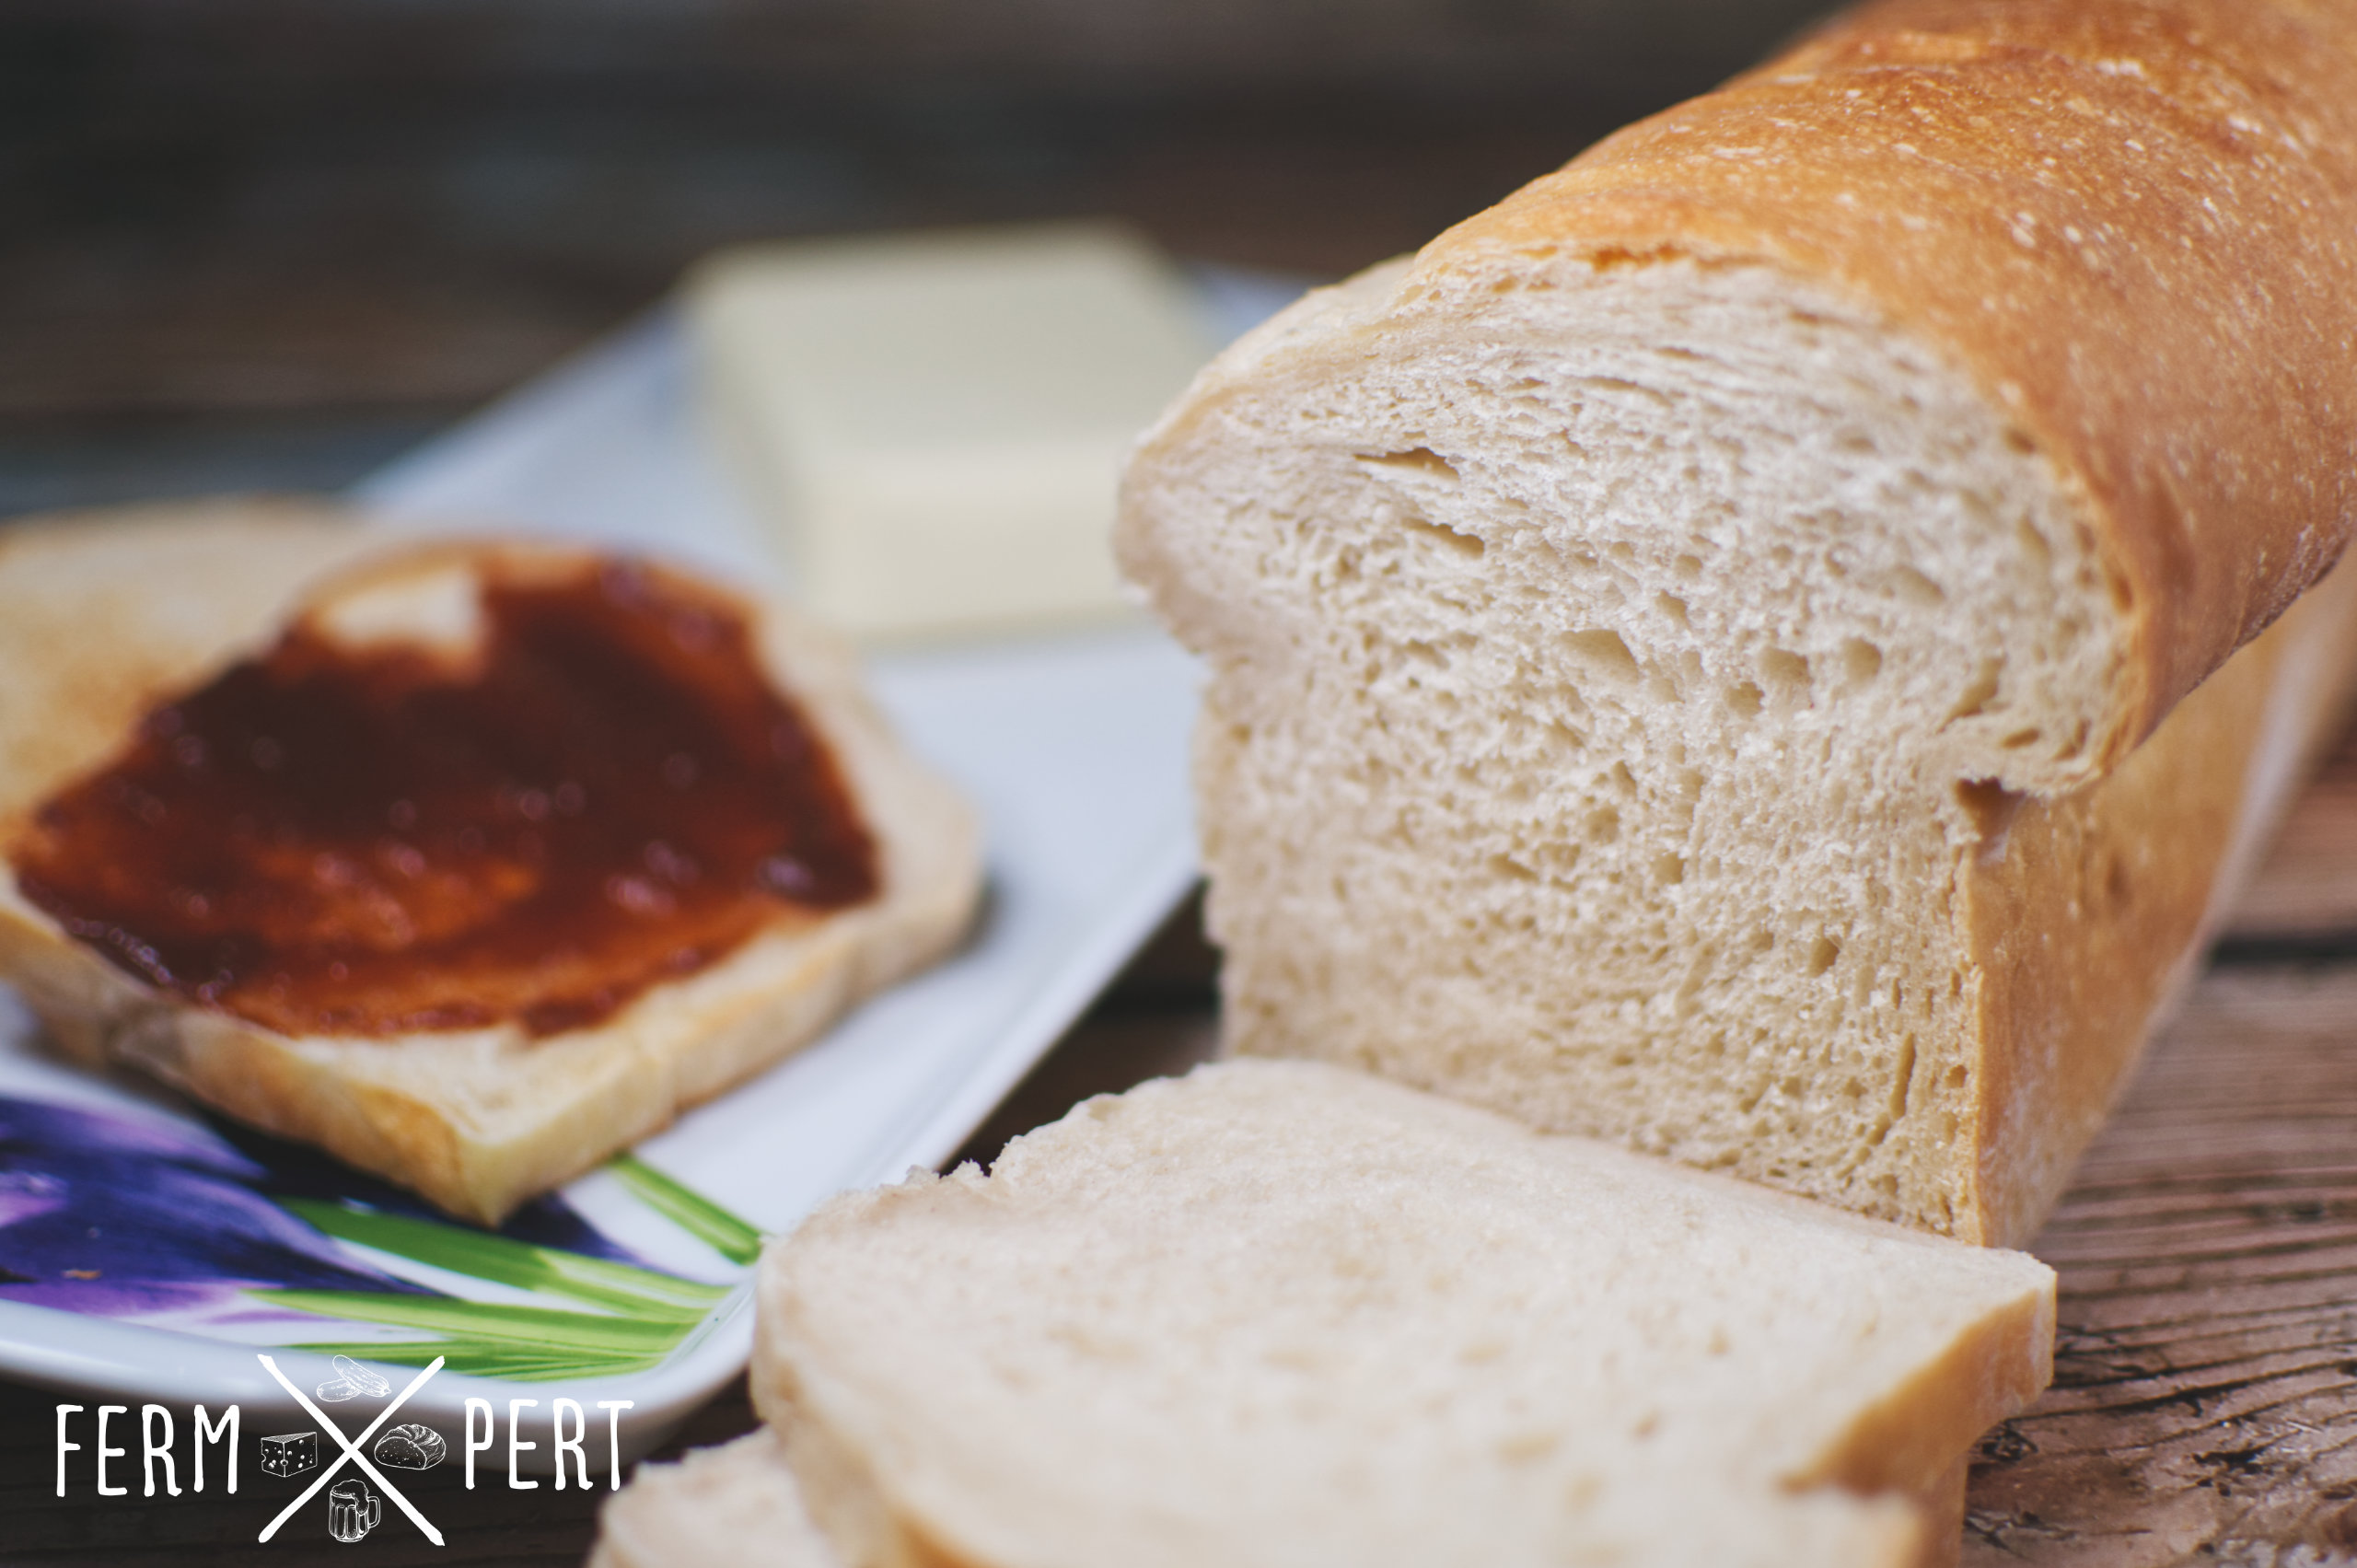 Photo of a loaf of sandwich bread with a toast with jam on the left.